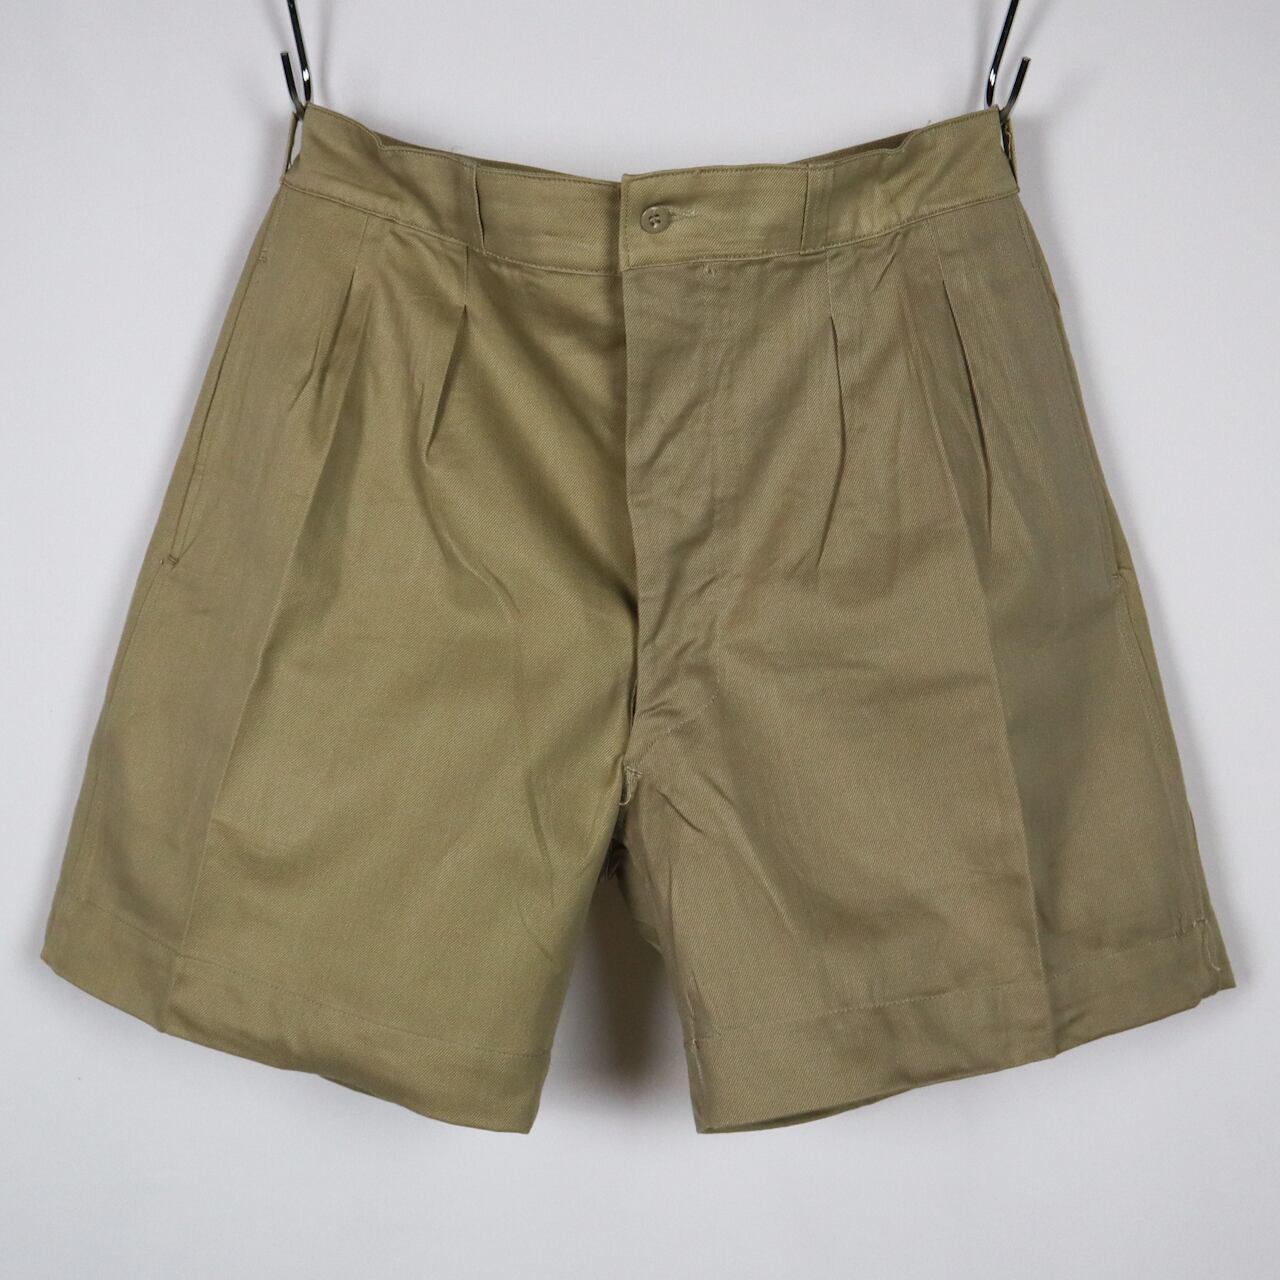 DEADSTOCK】FRENCH ARMY M-52 CHINO SHORTS フランス軍 2タック チノ 